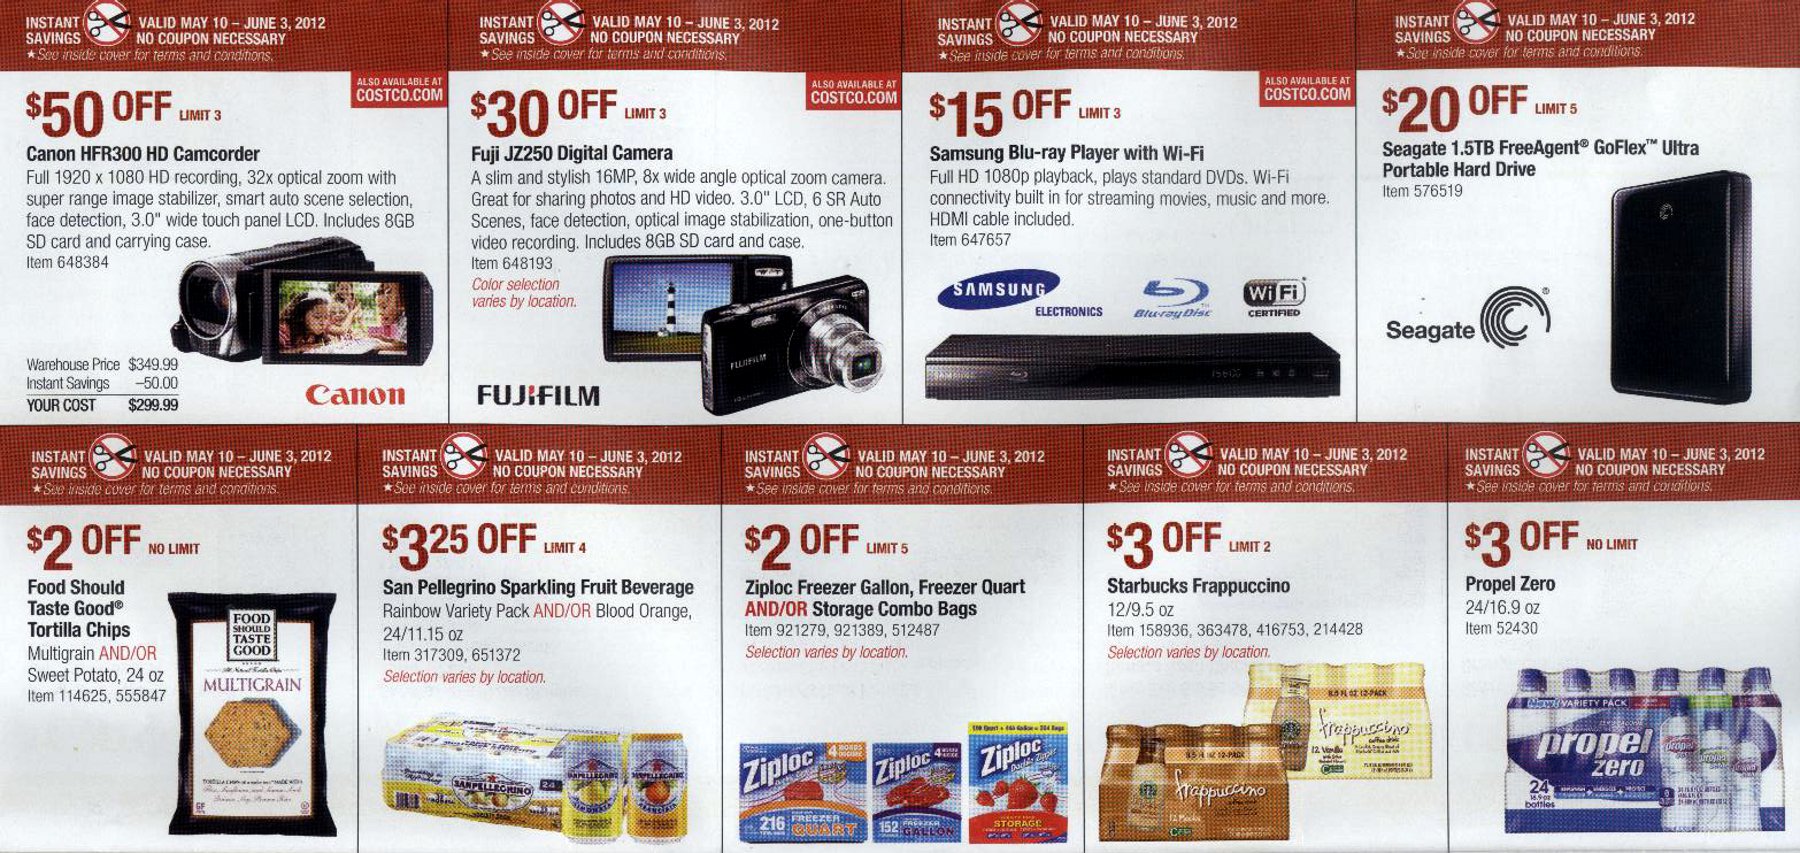 Coupon book full size page -> 2 <-